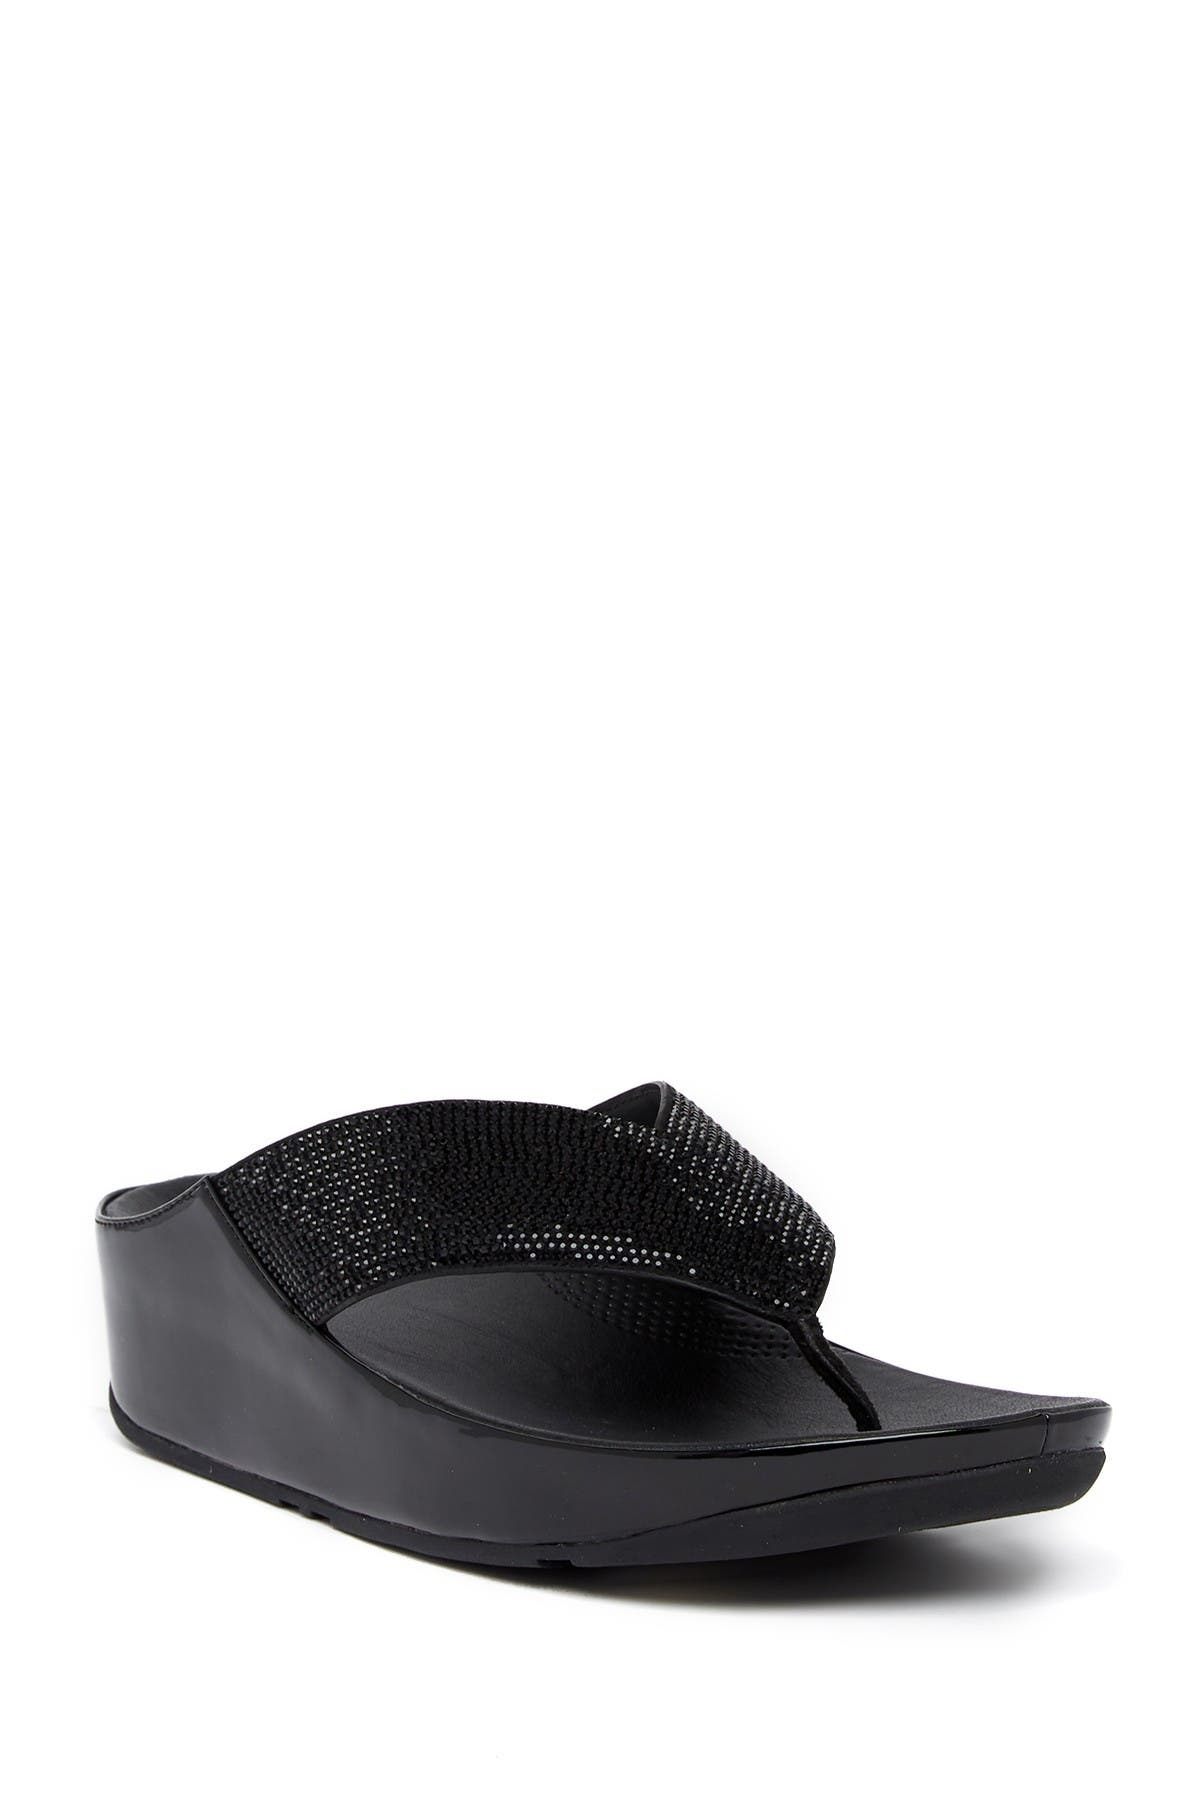 Fitflop | Crystal Wedge Thong Sandal 